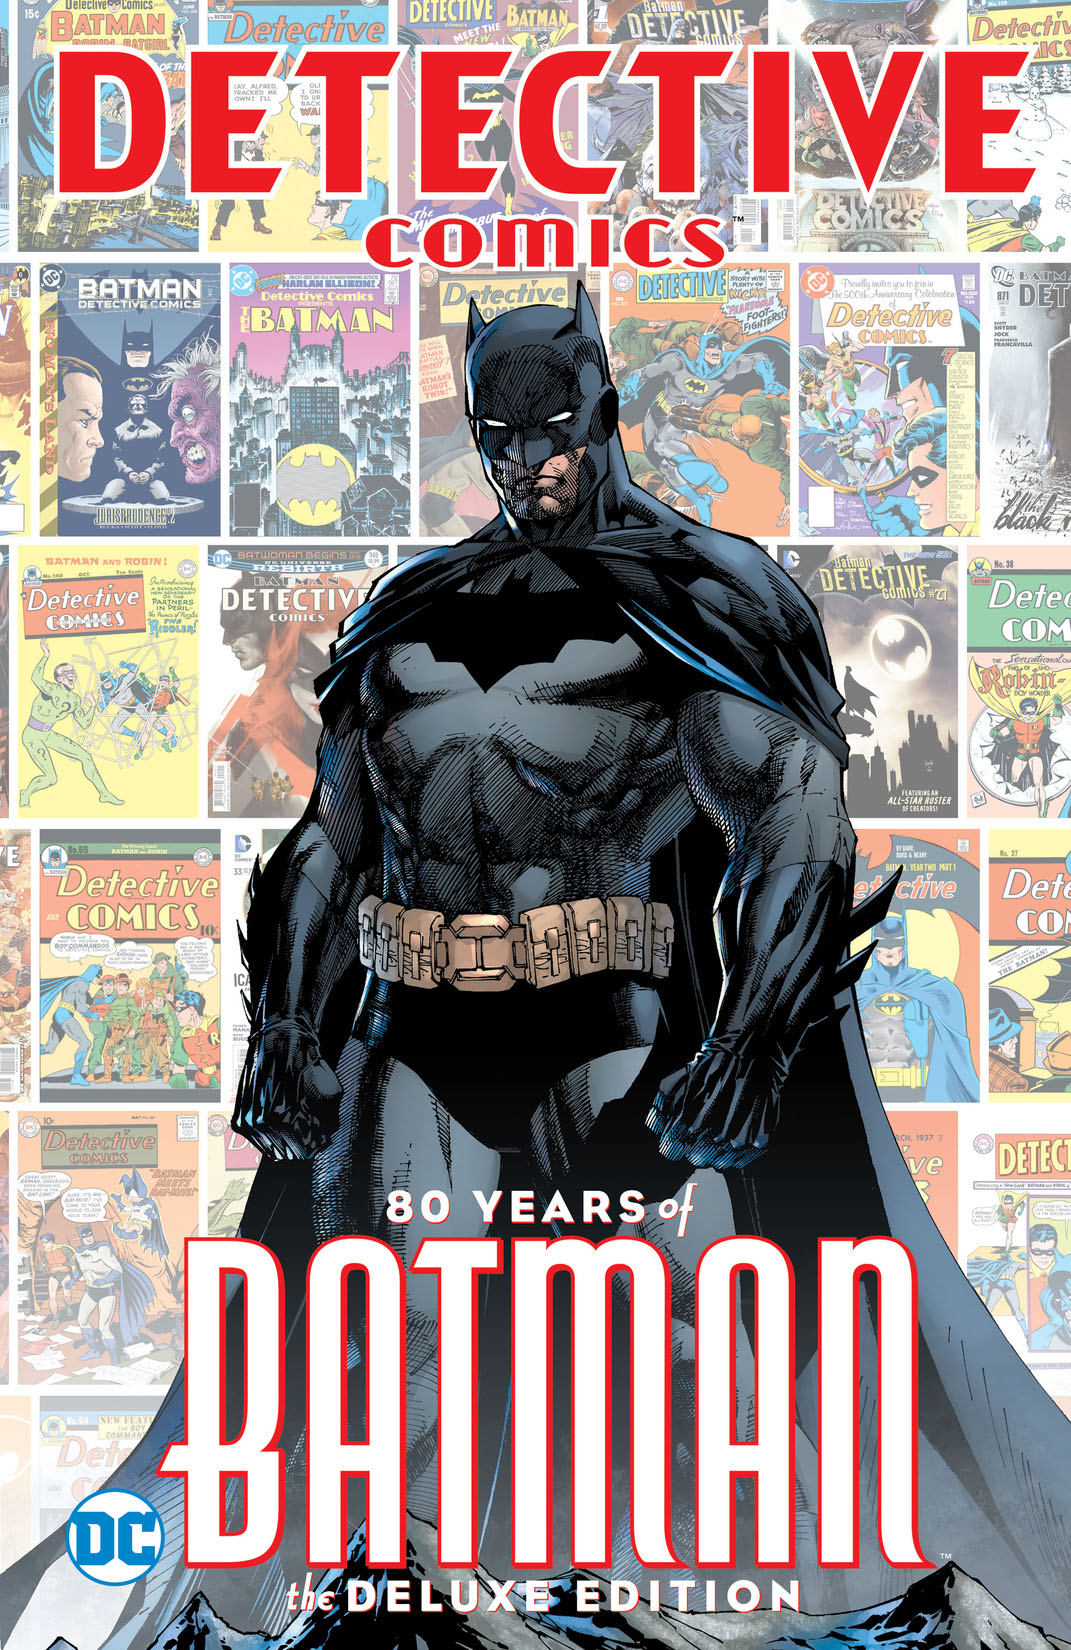 Detective Comics: 80 Years of Batman Deluxe Edition preview images